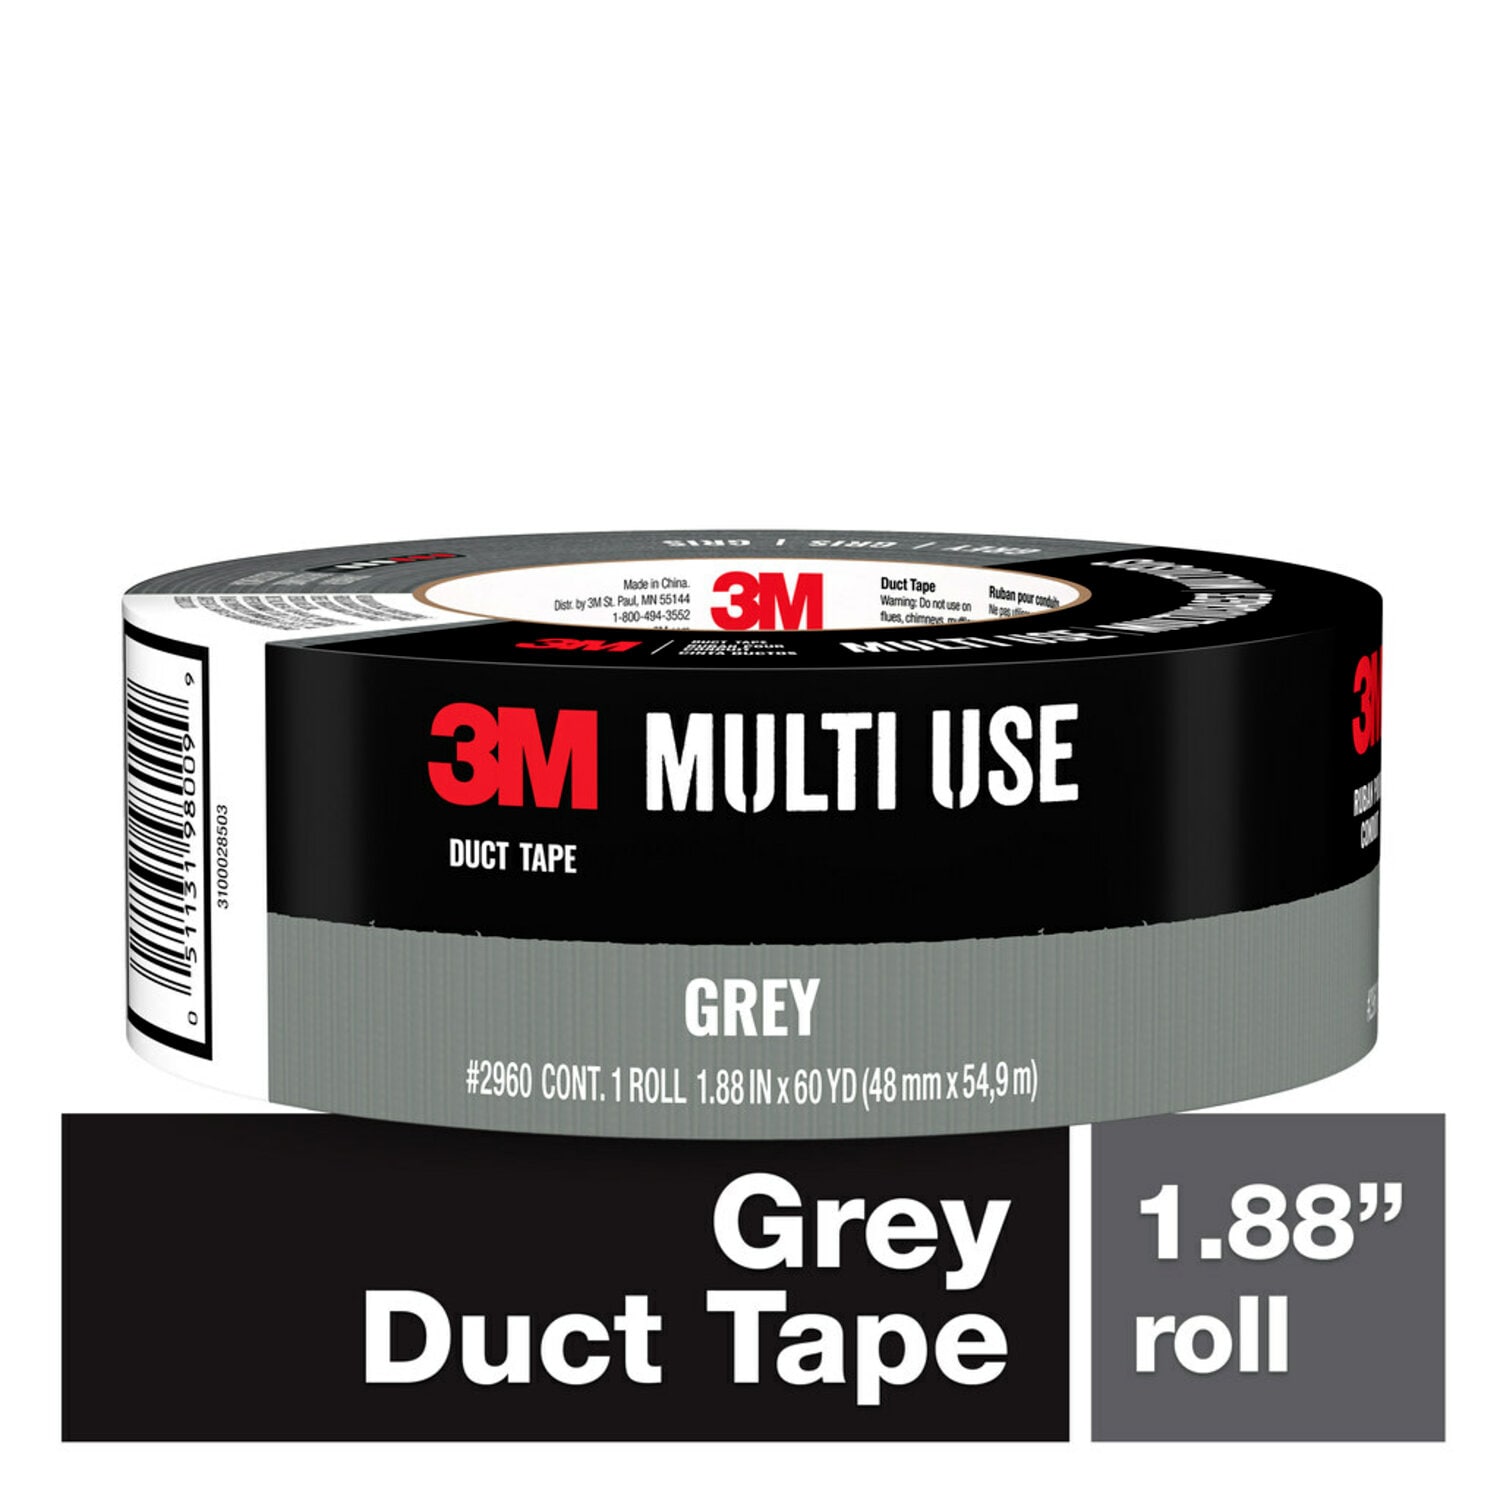 7100192440 - 3M Multi-Use Duct Tape 2900, 1.88 in x 60 yd (48 mm x 54,8 m)